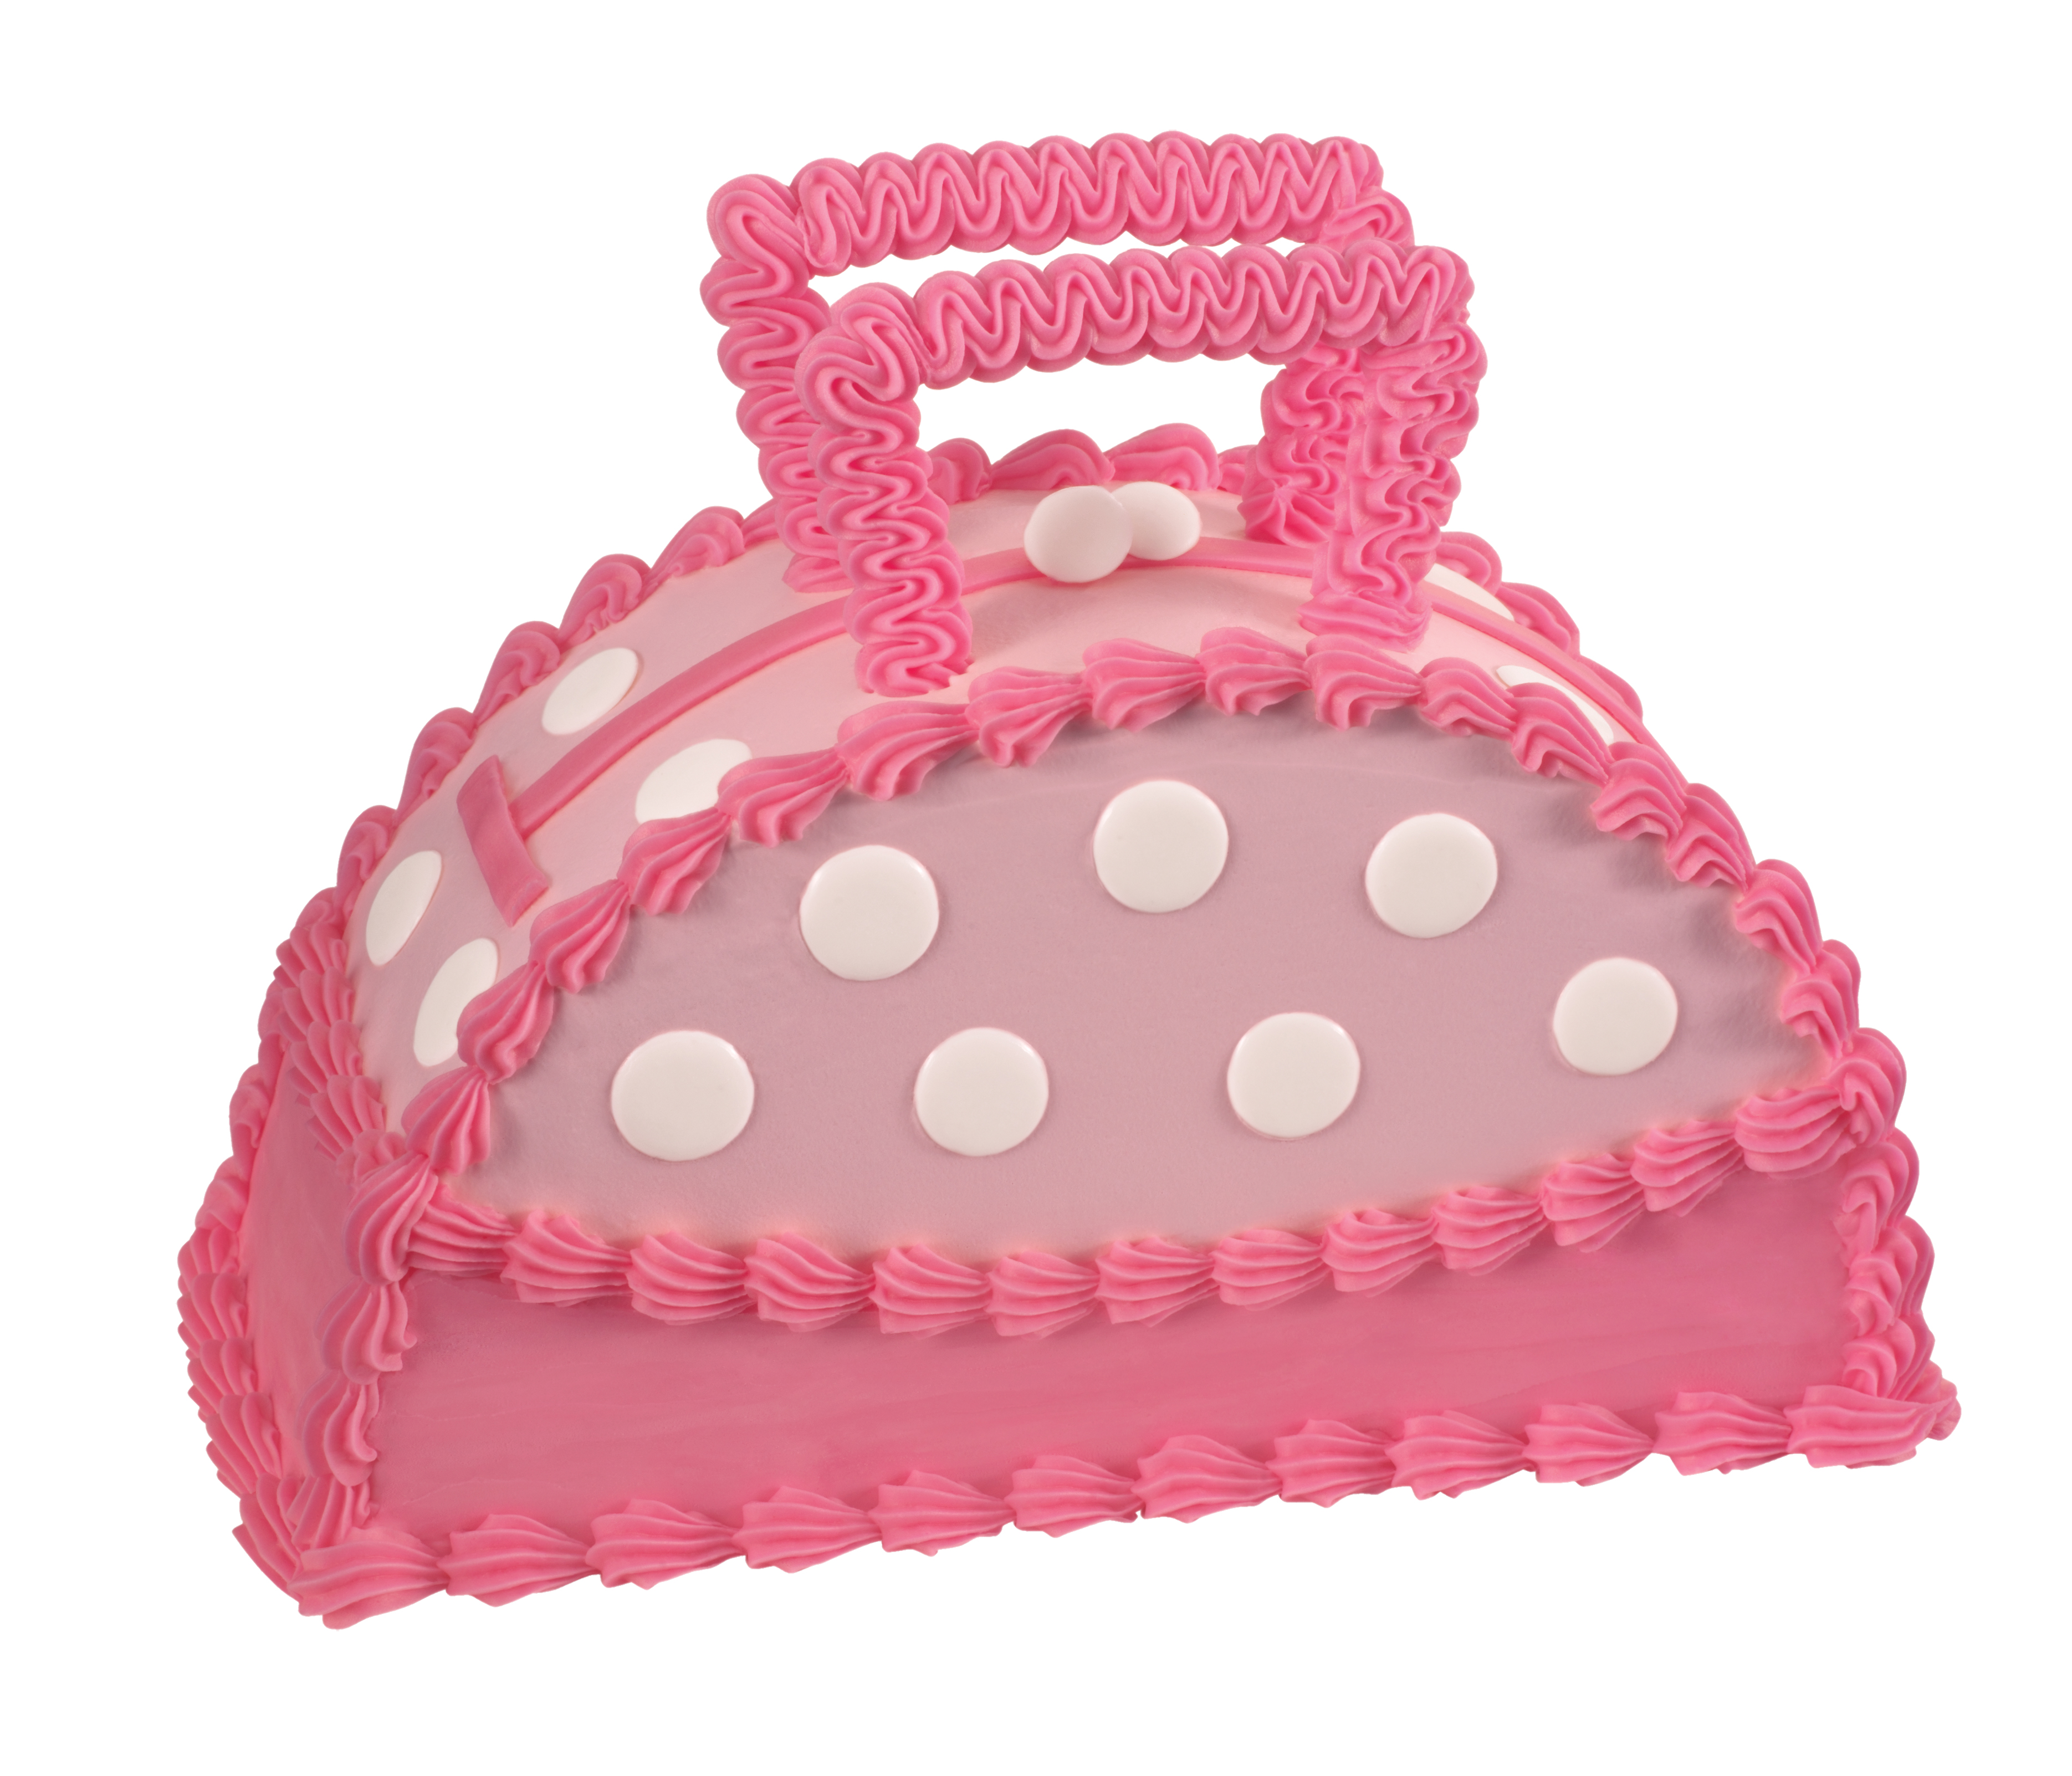 How to Make a Mothers Day Hand Bag Cake